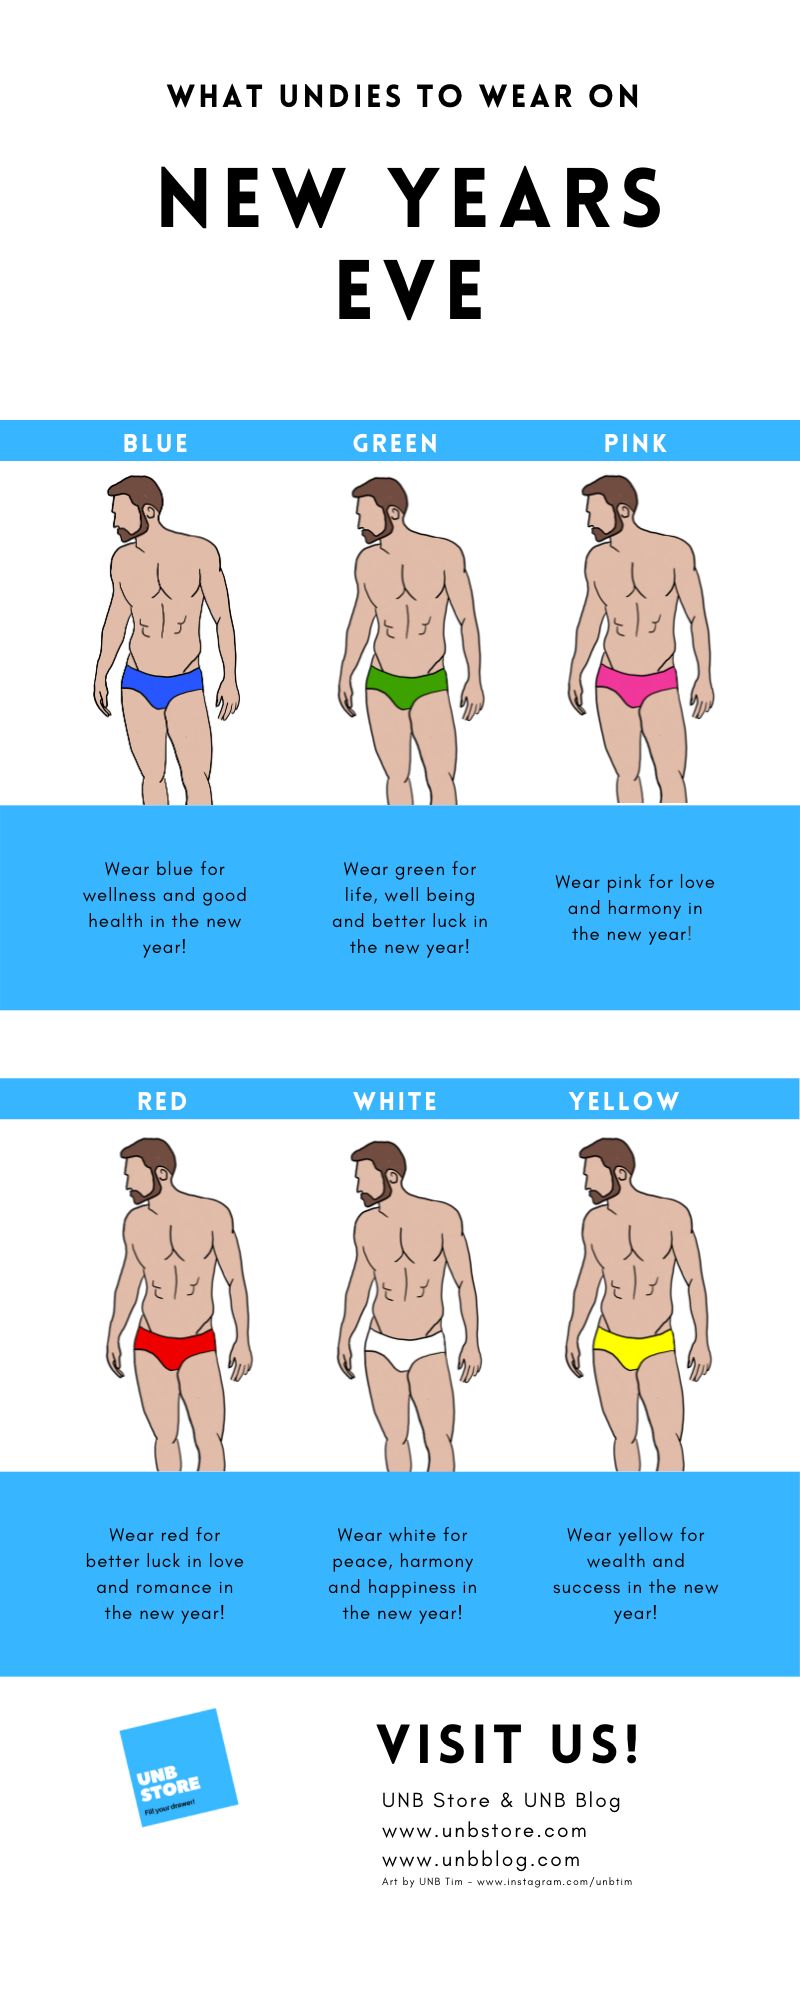 New Year's Underwear Color: Traditions Around the World – WAMA